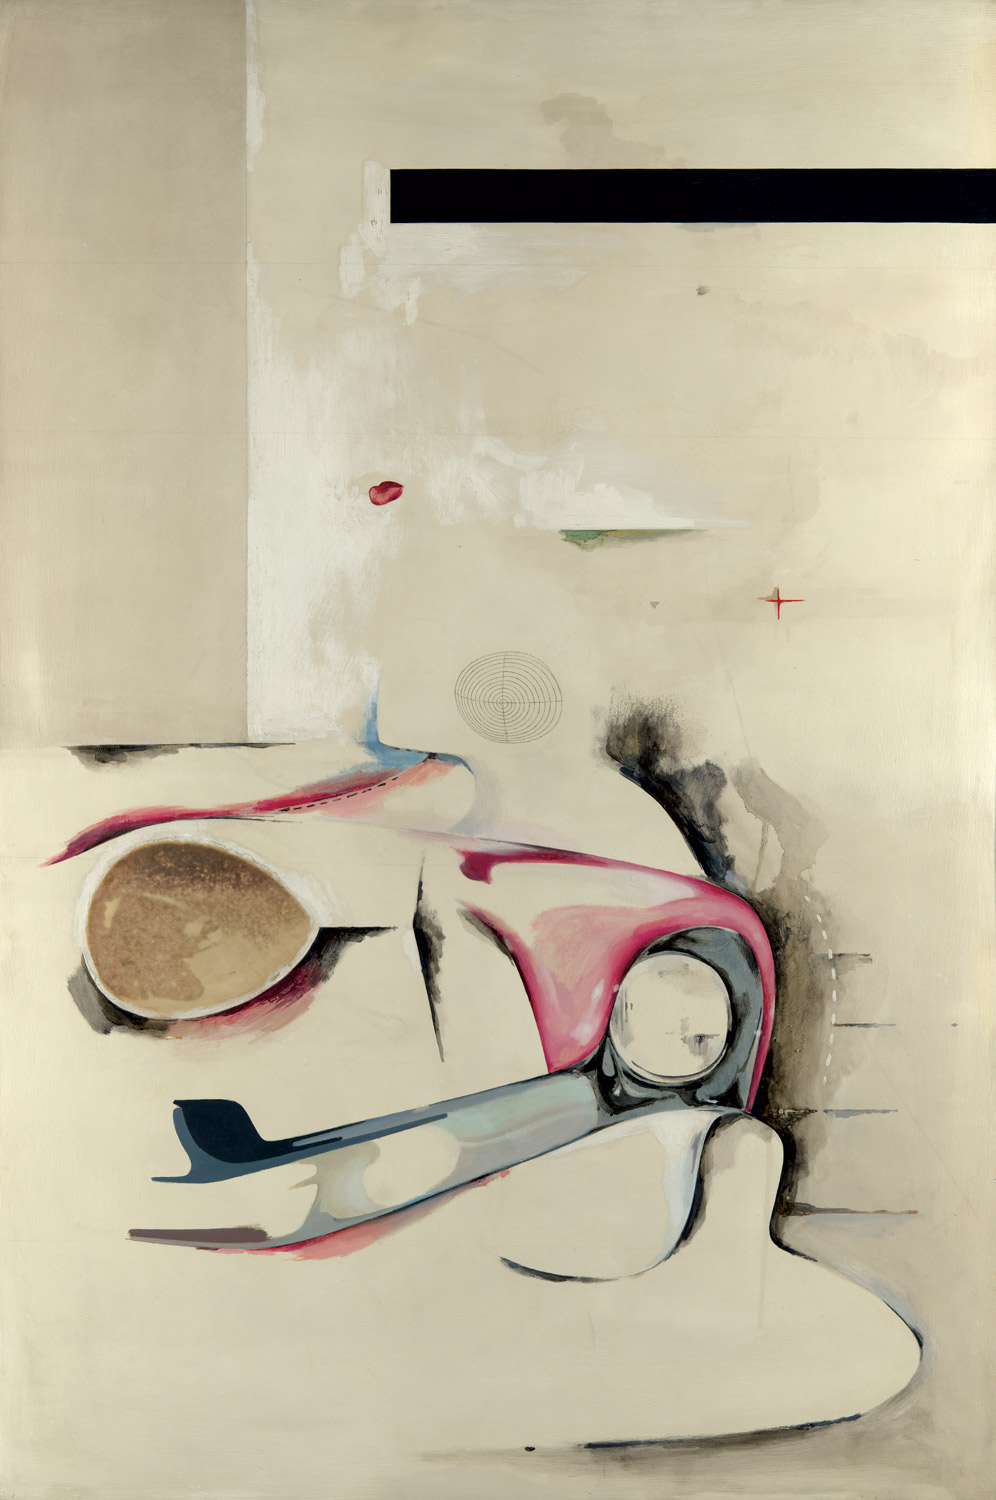 The nineteen fifty seven painting “Hommage a Chrysler Corp” by Richard Hamilton, depicting an abstract representation of a car’s headlights.